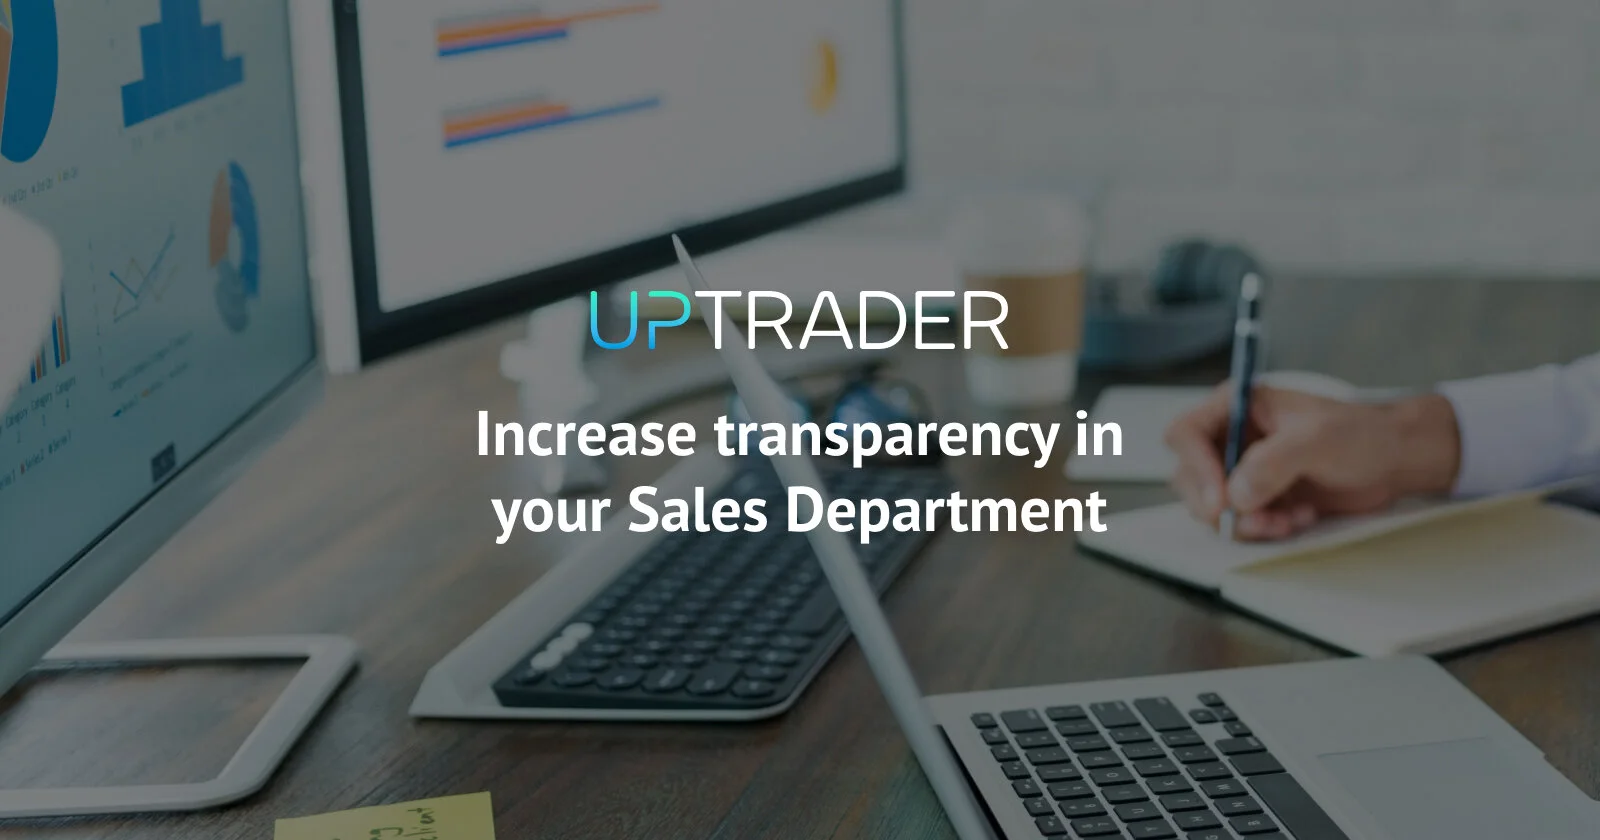 Increase transparency in your Sales Department